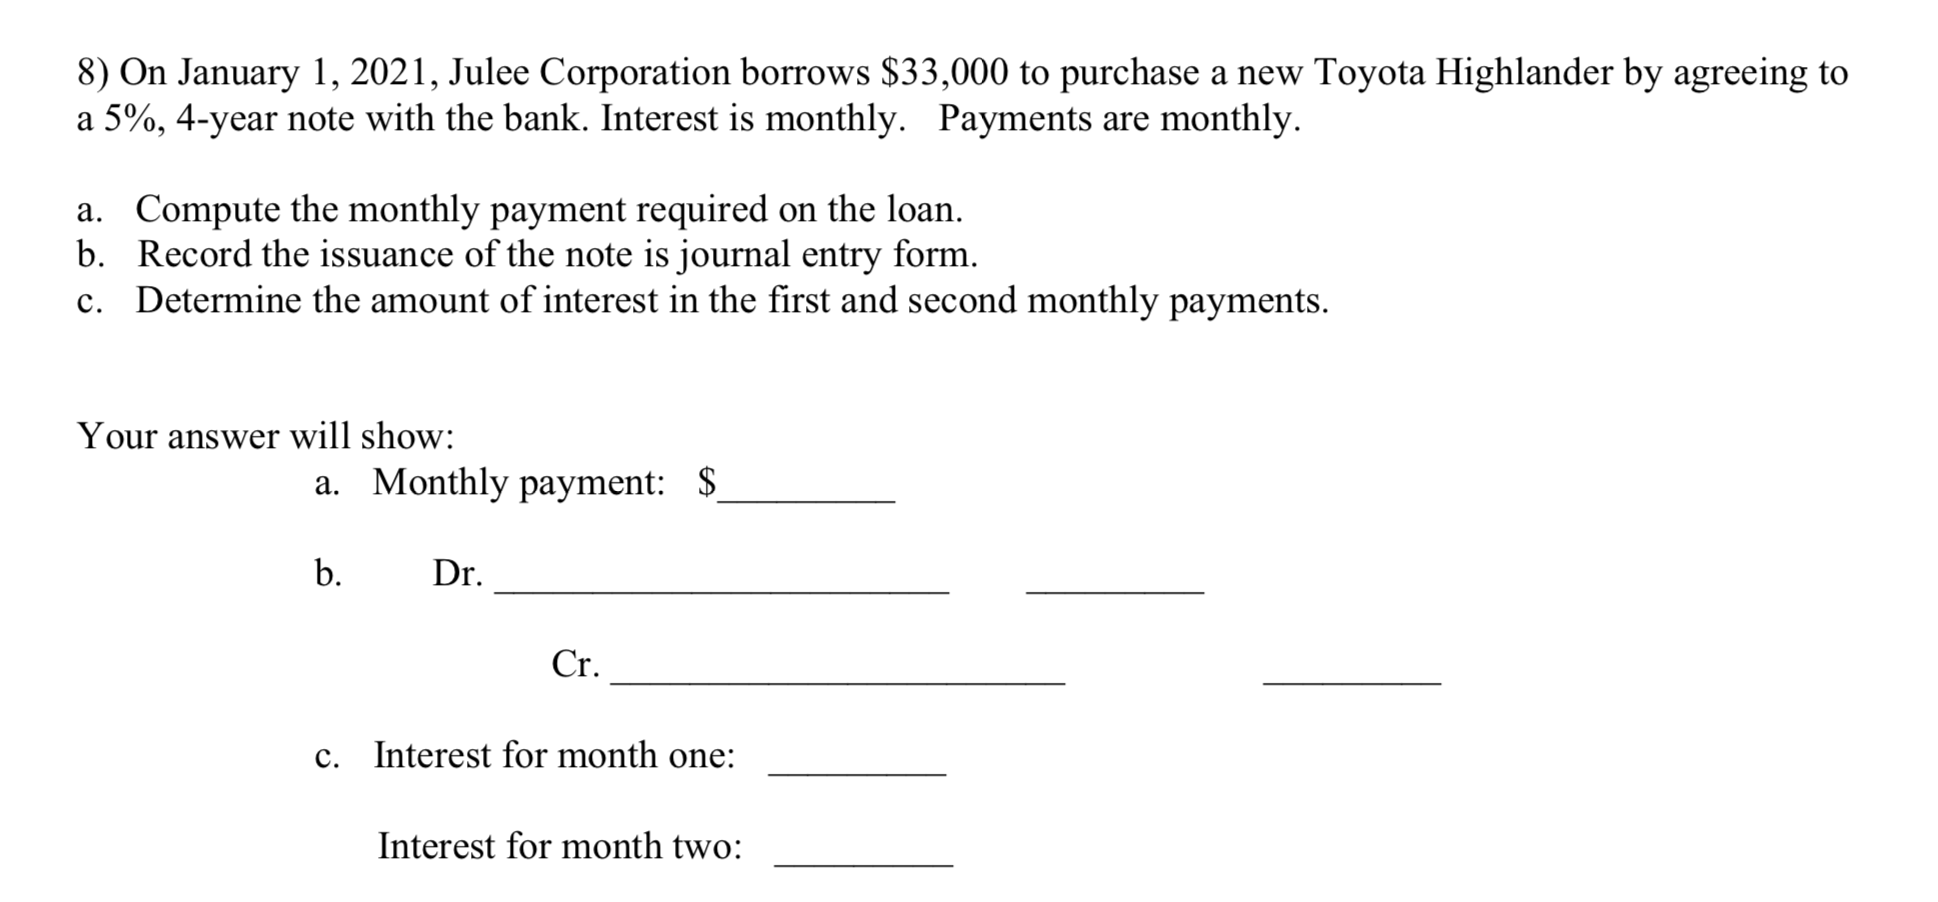 8) On January 1, 2021, Julee Corporation borrows $33,000 to purchase a new Toyota Highlander by agreeing to
a 5%, 4-year note with the bank. Interest is monthly. Payments are monthly.
a. Compute the monthly payment required on the loan.
b. Record the issuance of the note is journal entry form.
c. Determine the amount of interest in the first and second monthly payments.
Your answer will show:
a. Monthly payment: $
b.
Dr.
Cr.
c.
Interest for month one:
Interest for month two:
